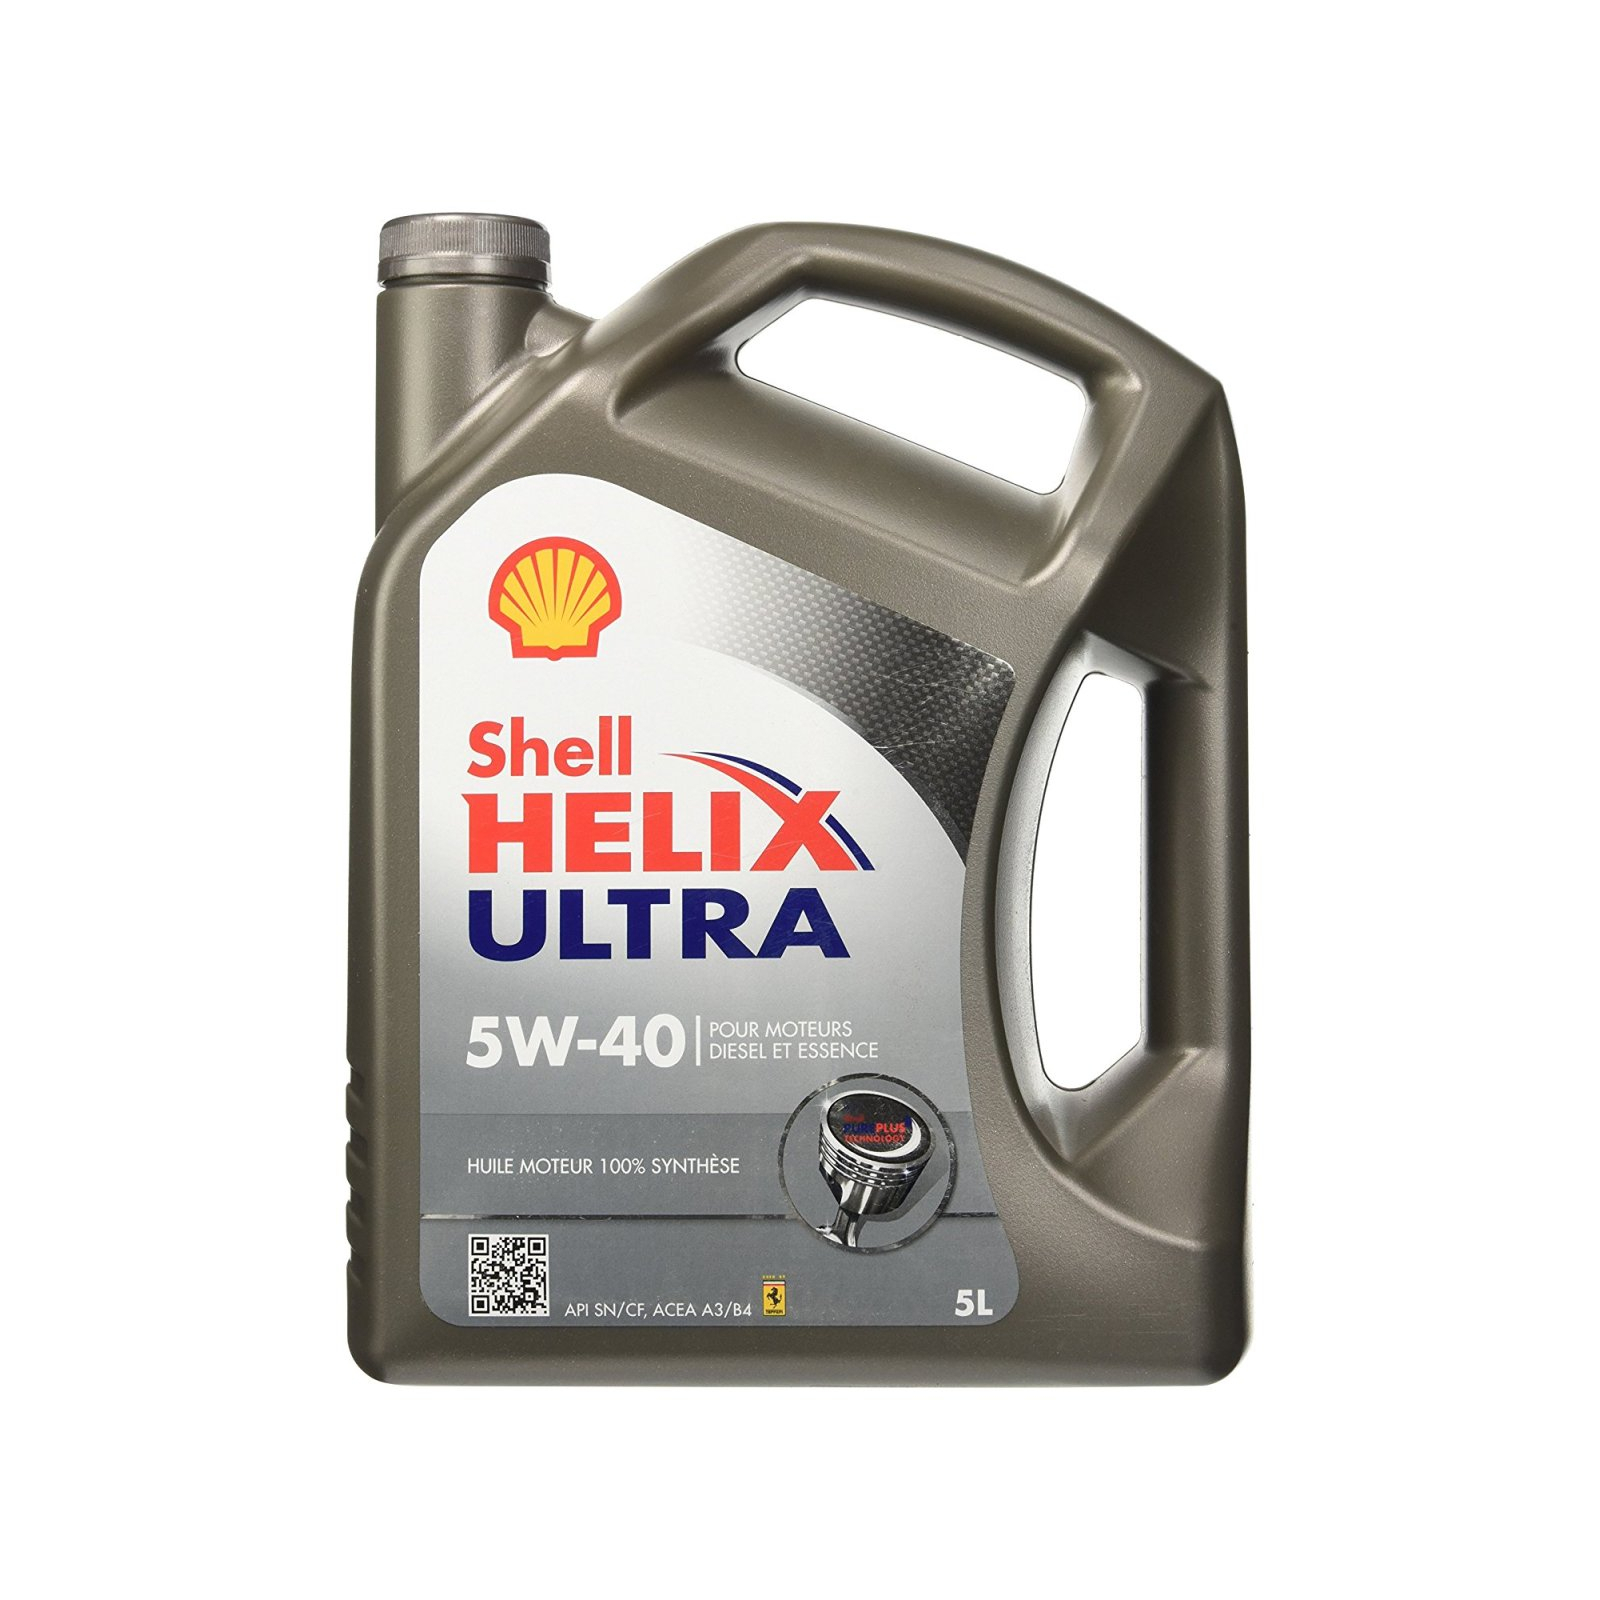 Моторное масло Shell Helix Ultra 5w/40 5л (73991)